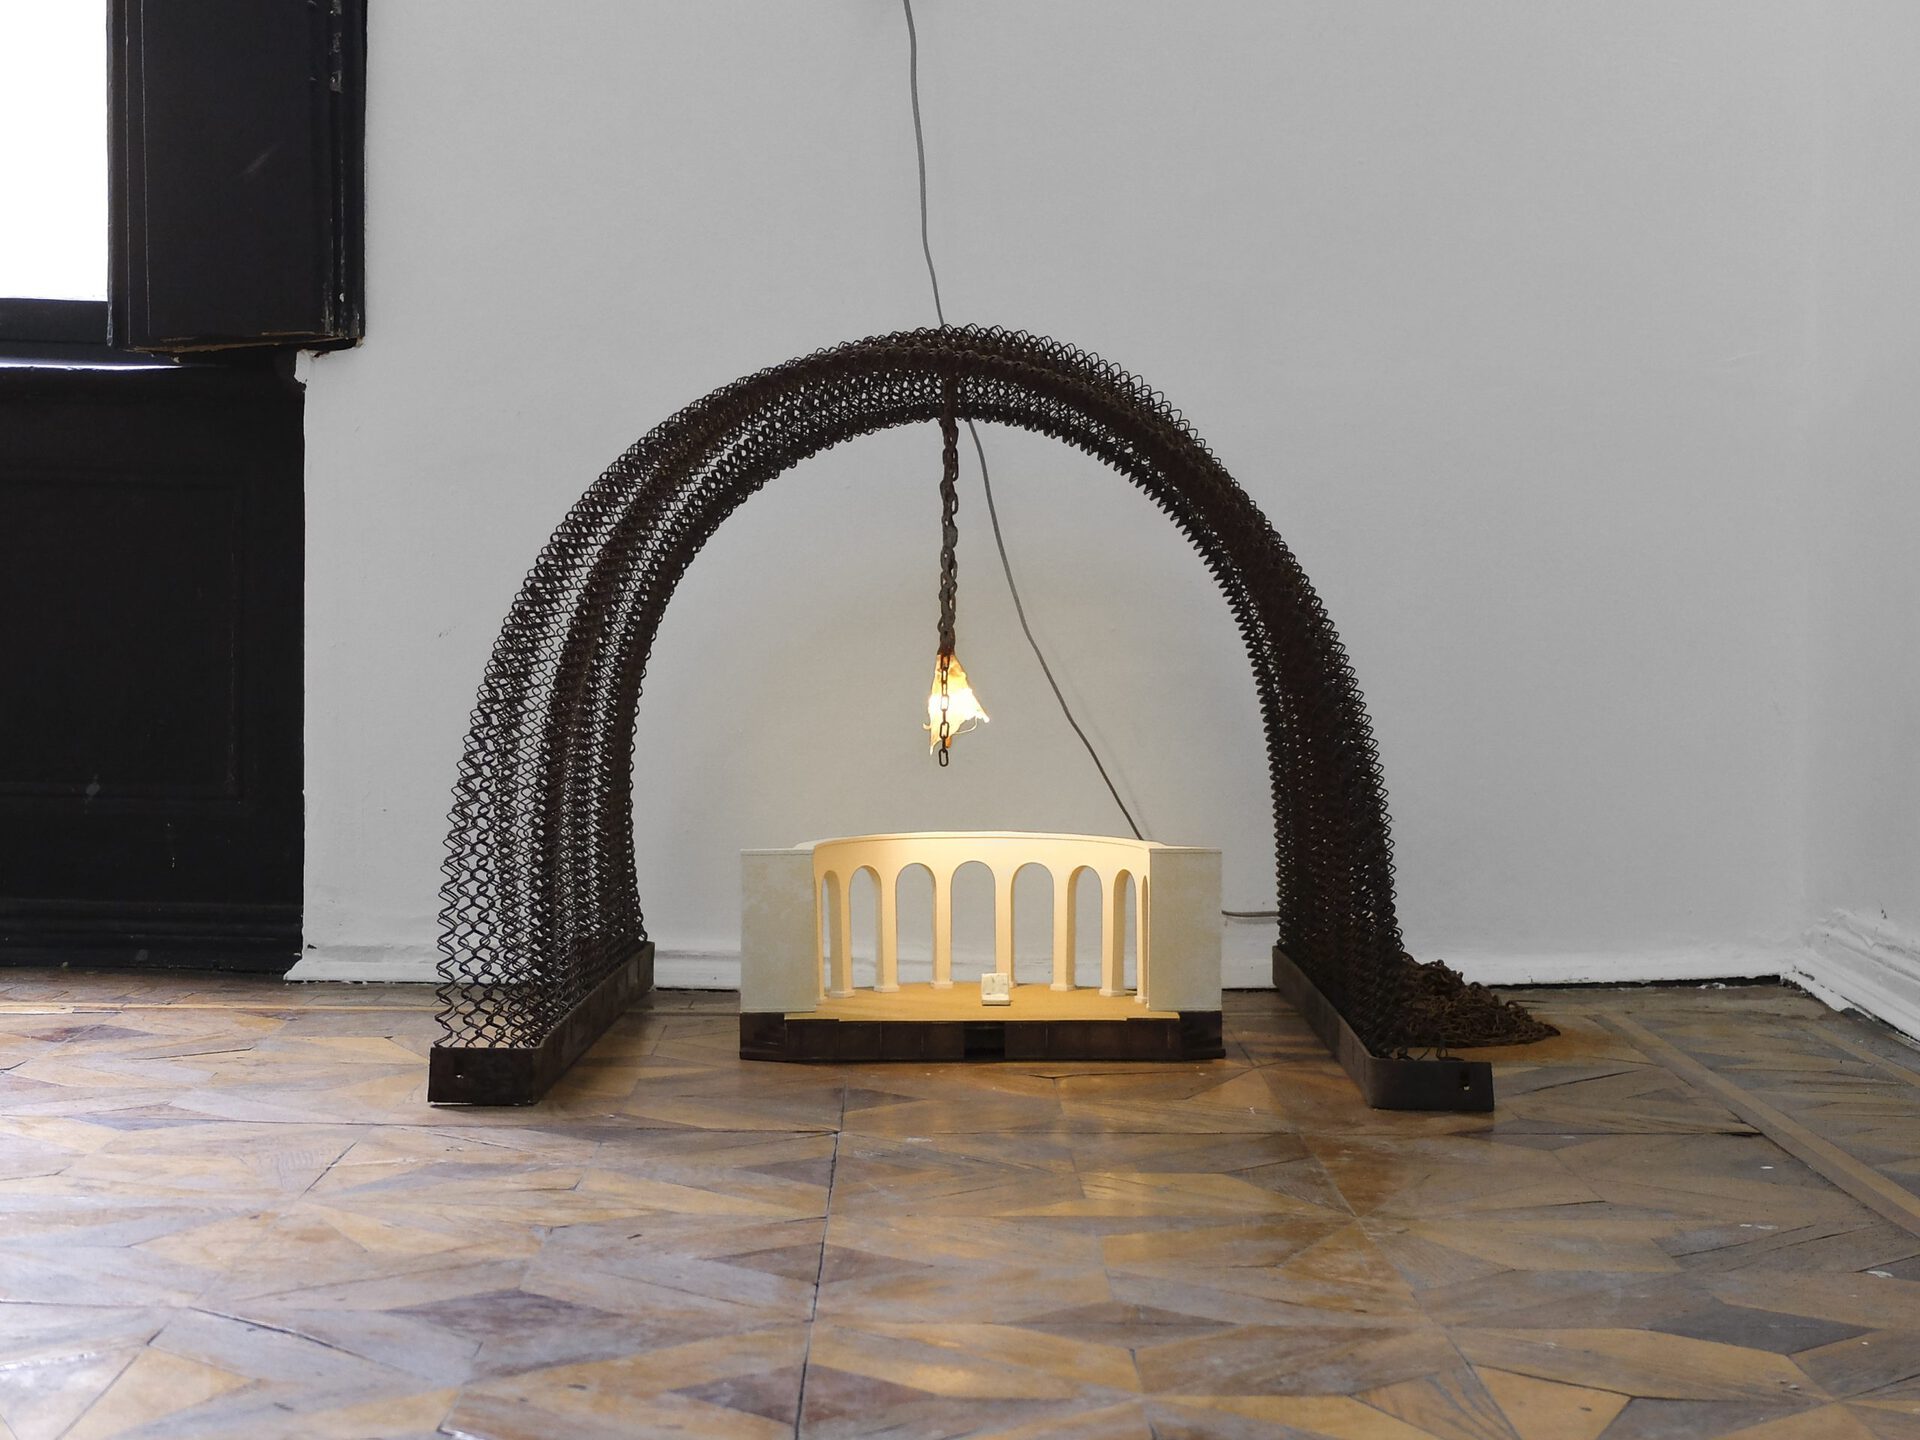 Sophie Jung, echo of the kennel b arch in spring (no man’s ouverture), 2021. arched bed spring, dog chain, wallpaper from abandoned rooms in a sanatorium, maquette of an abandoned stage and its back supporting character with main lead unleashed (back), 64 x 82 x 85,5 cm.